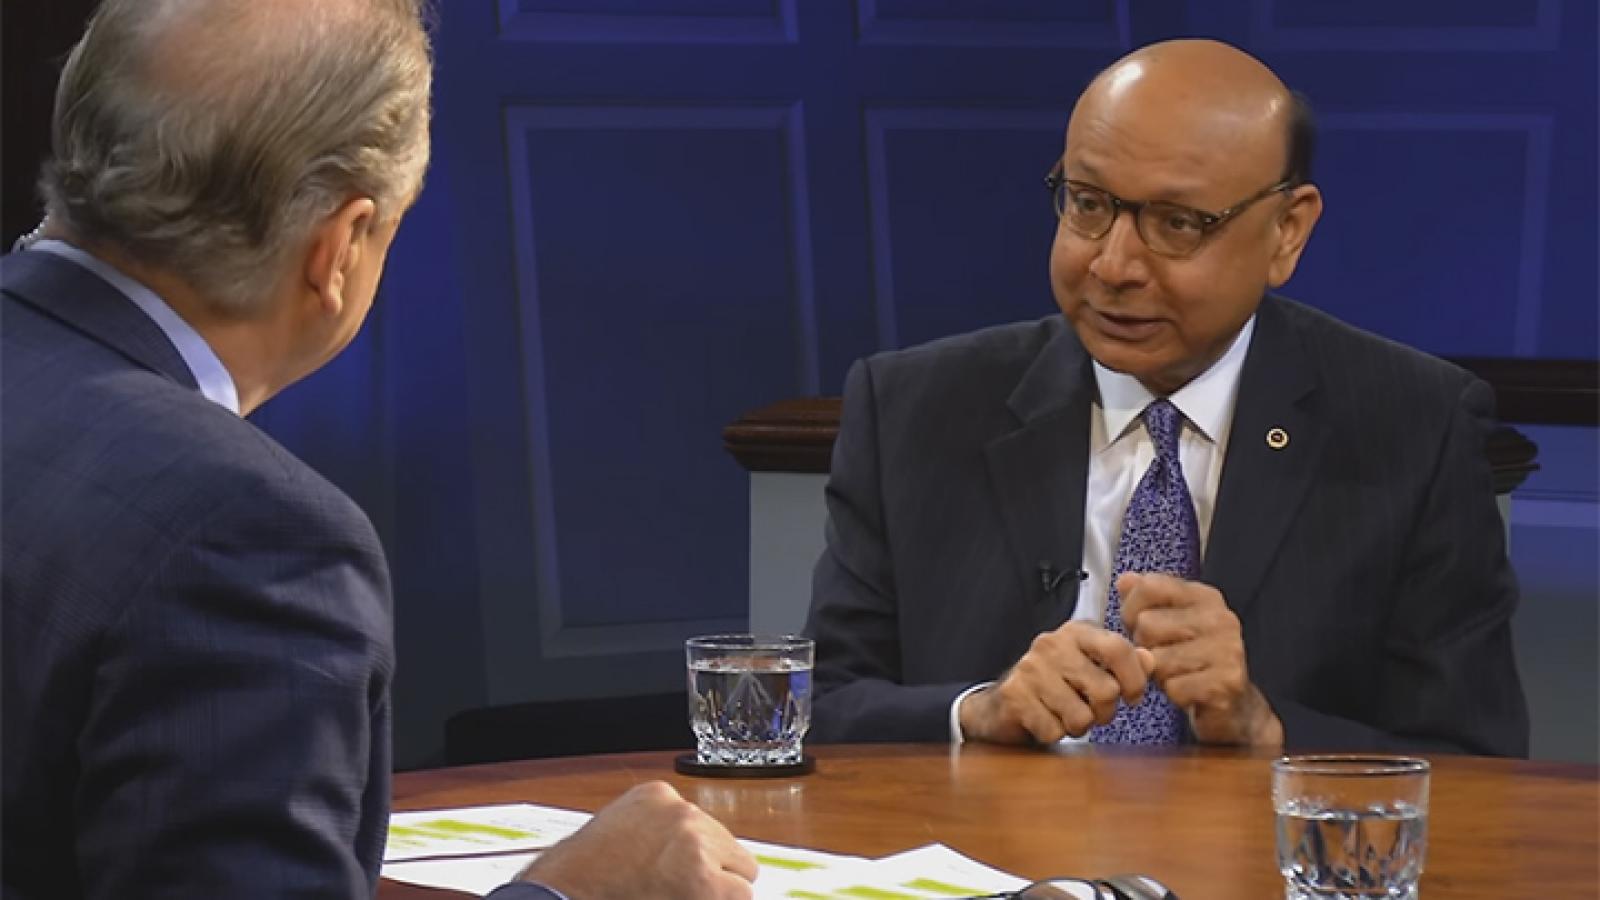 Muslim American Gold Star father Khizr Khan on how to view violence done in the name of Islam